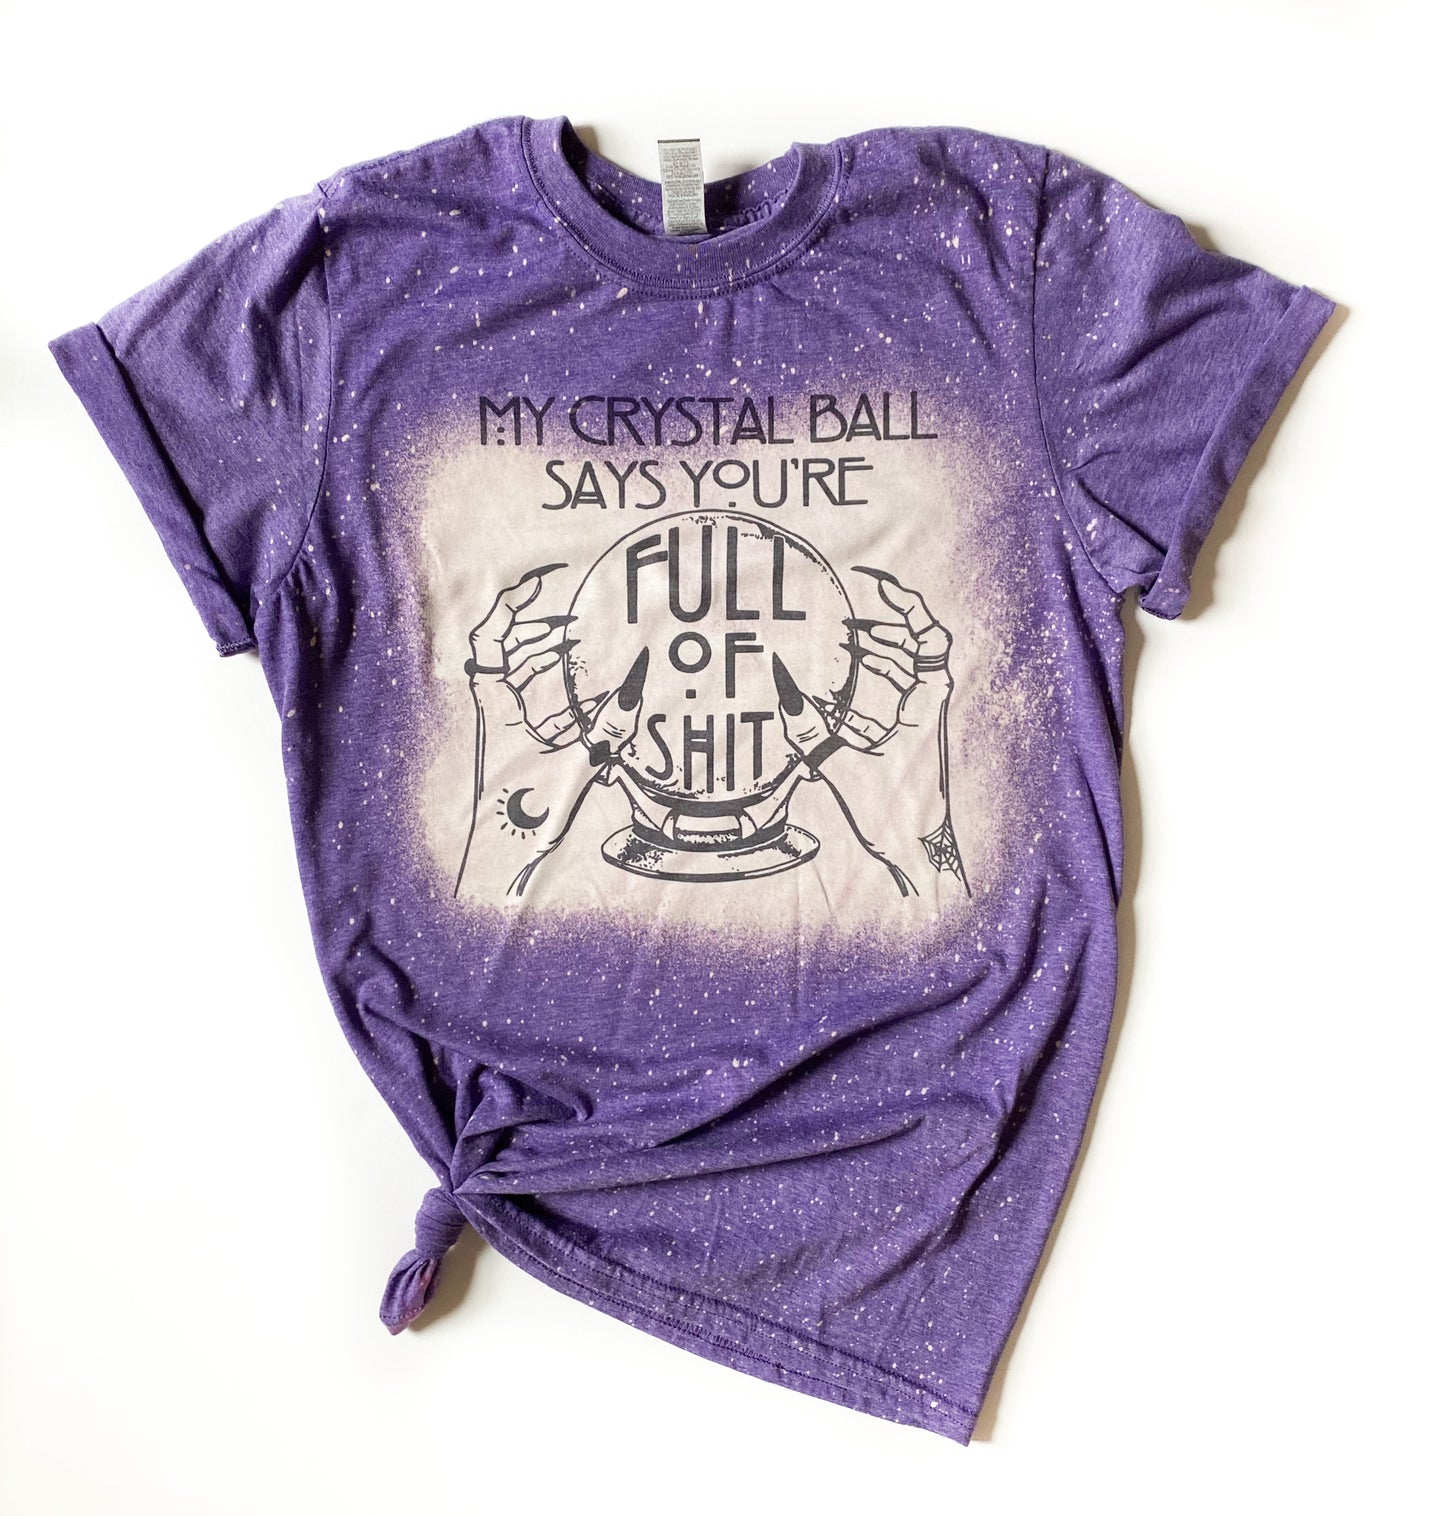 My Crystal Ball Says Your Full of Bleached Tee